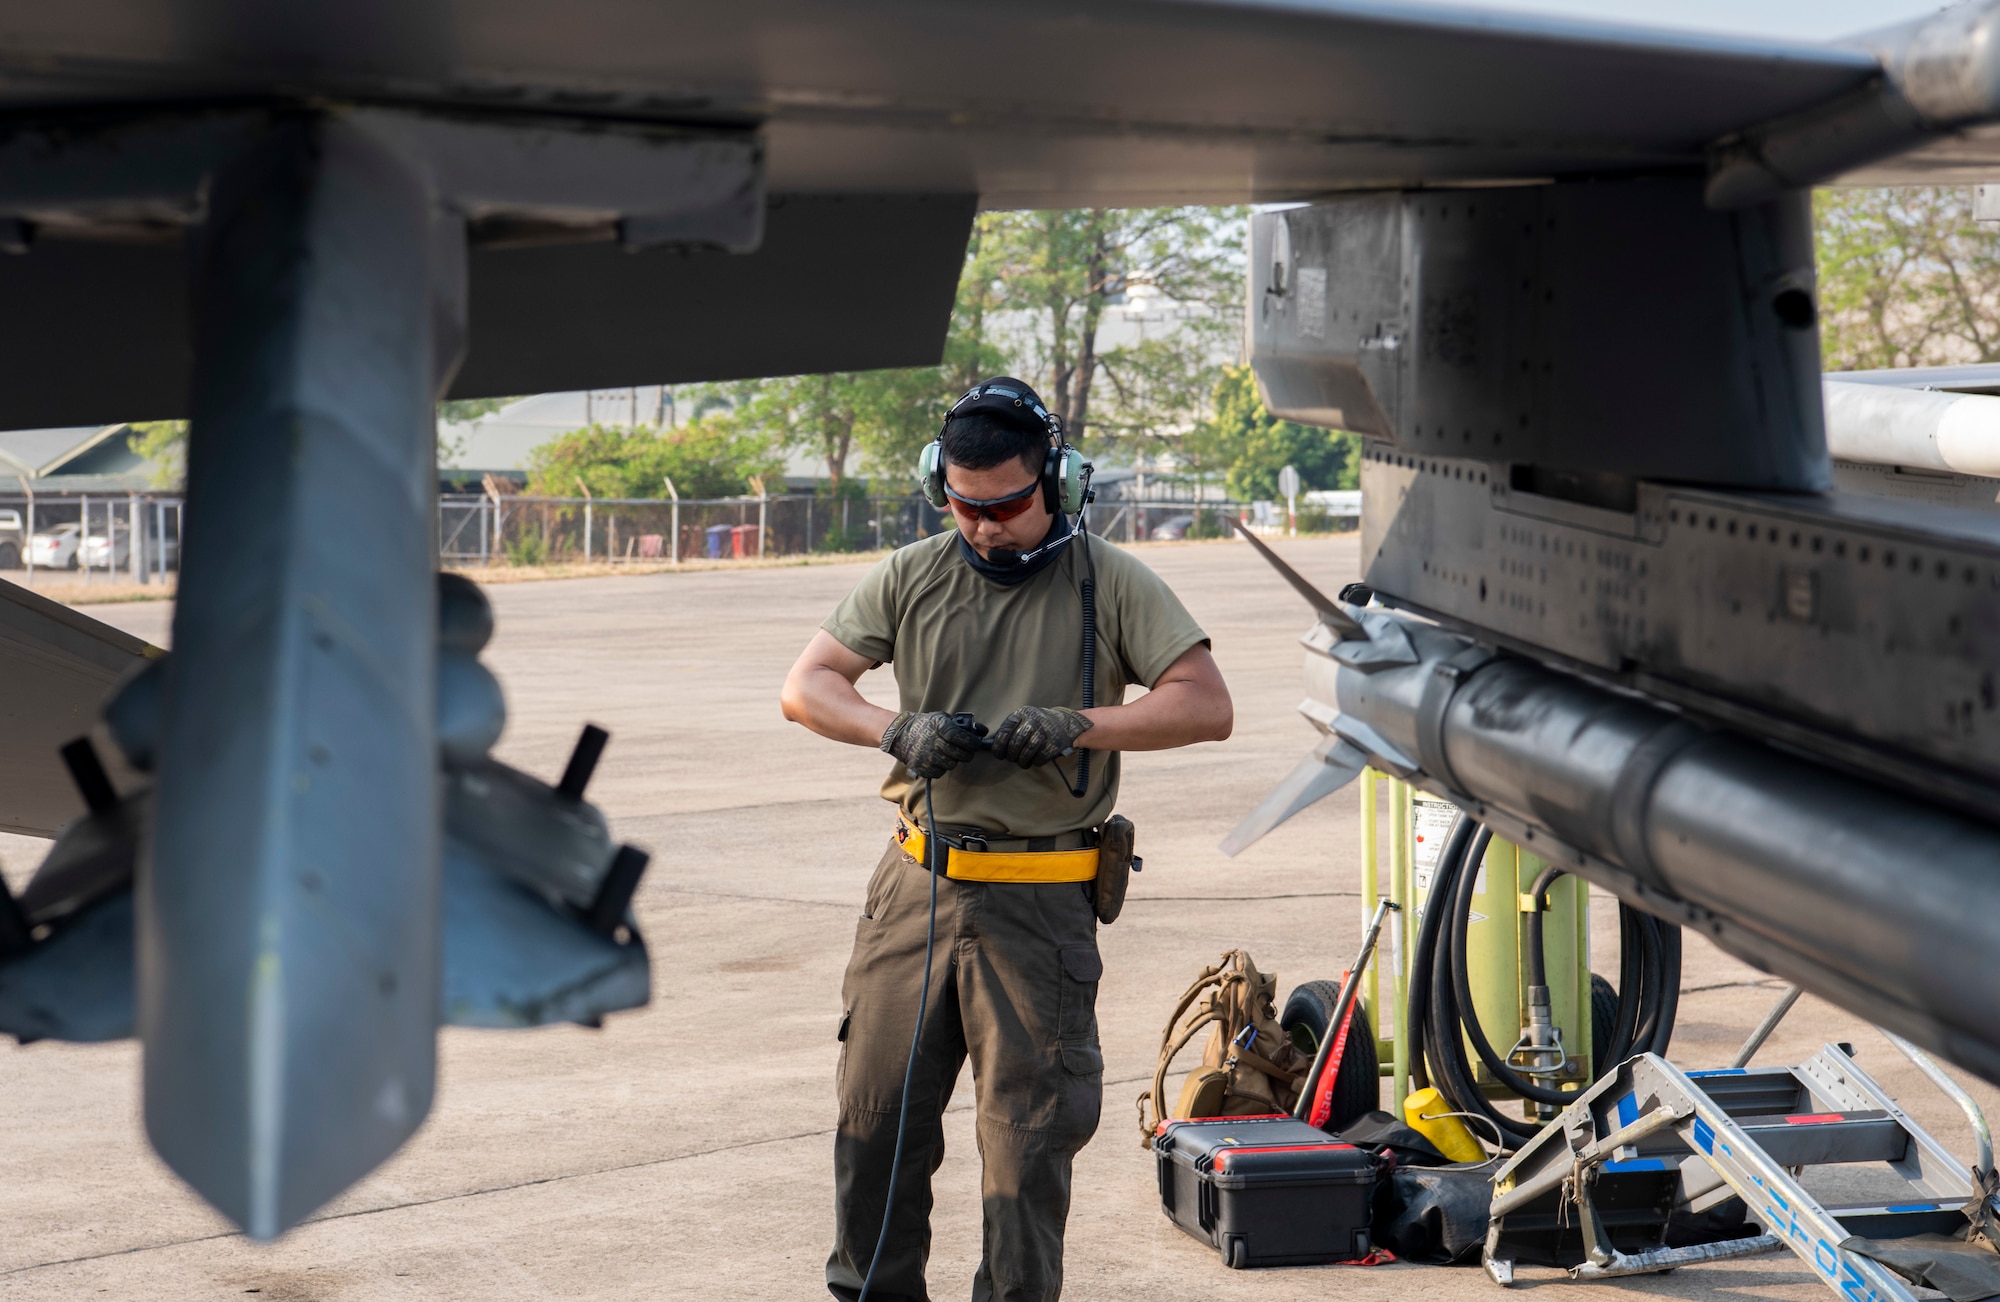 Crew chief perfoms maintenance on an aircraft